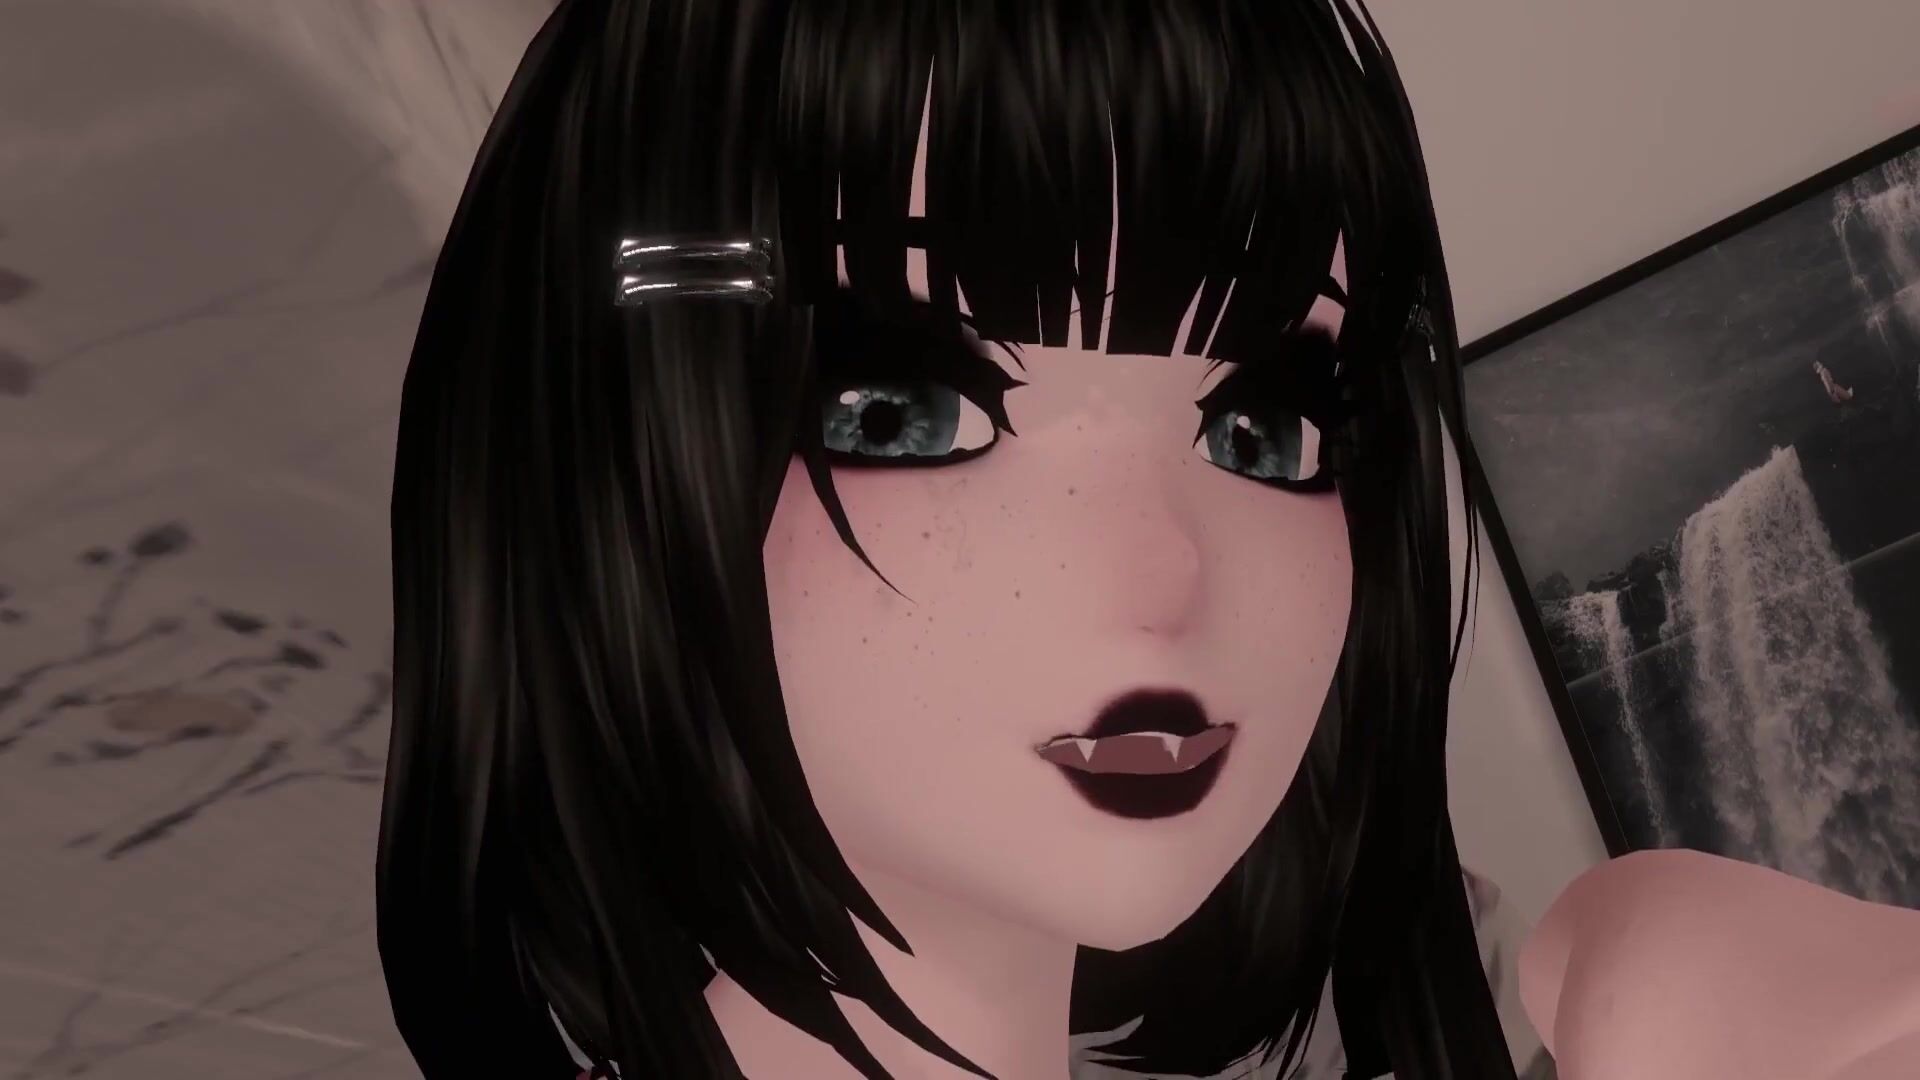 Sweet Romantic kiss and cuddle VR Virtual Goth GF comforts you during thunderstorm viewer POV watch online